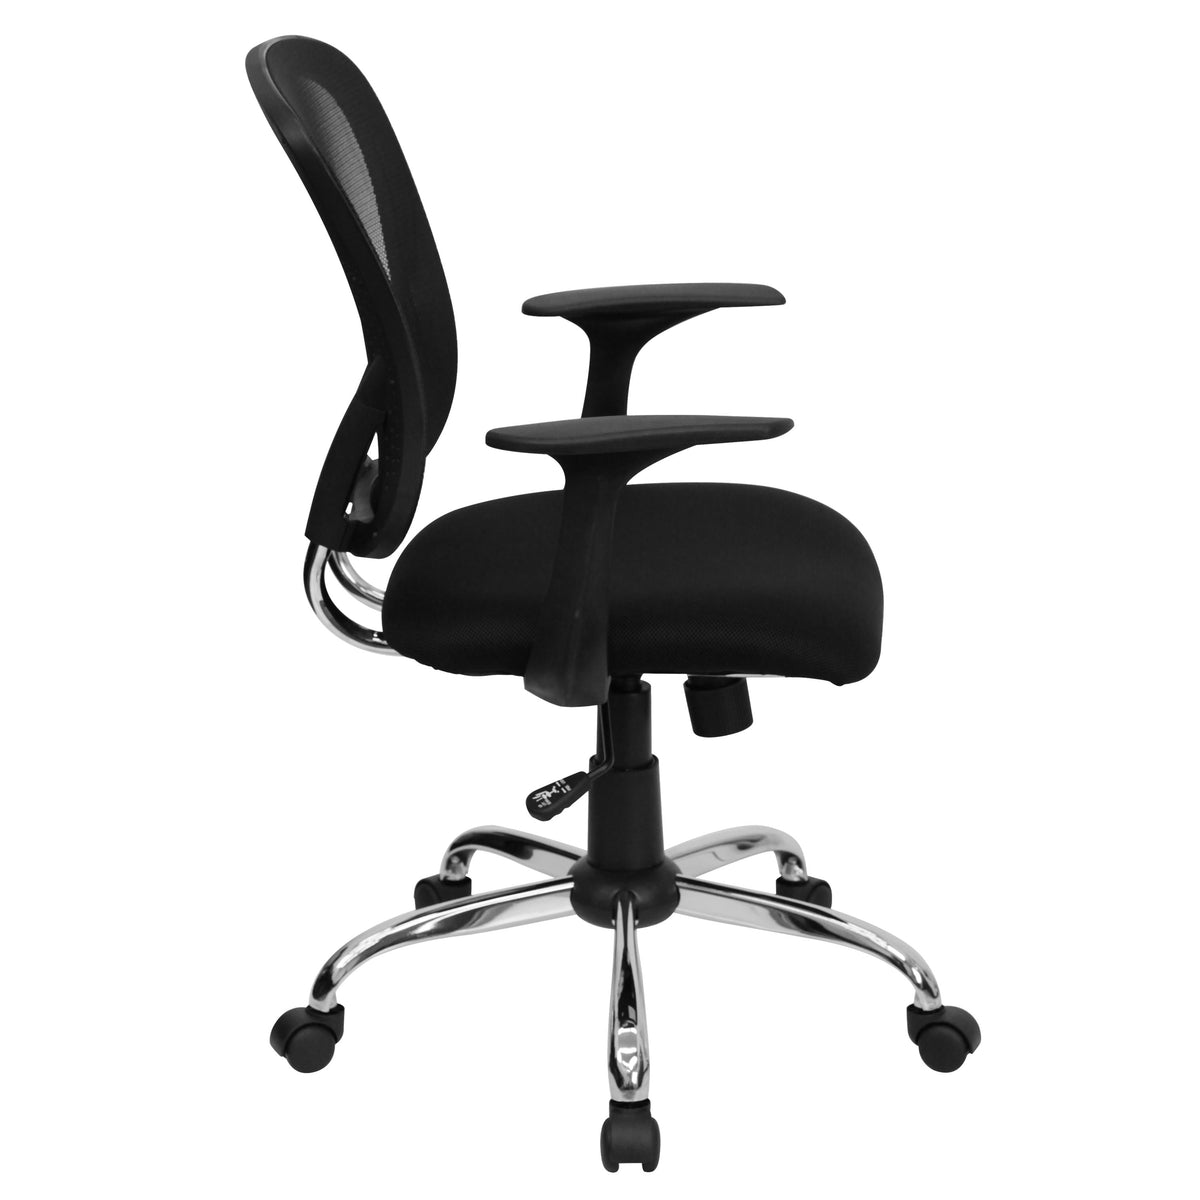 Black |#| Mid-Back Black Mesh Swivel Task Office Chair with Chrome Base and Arms